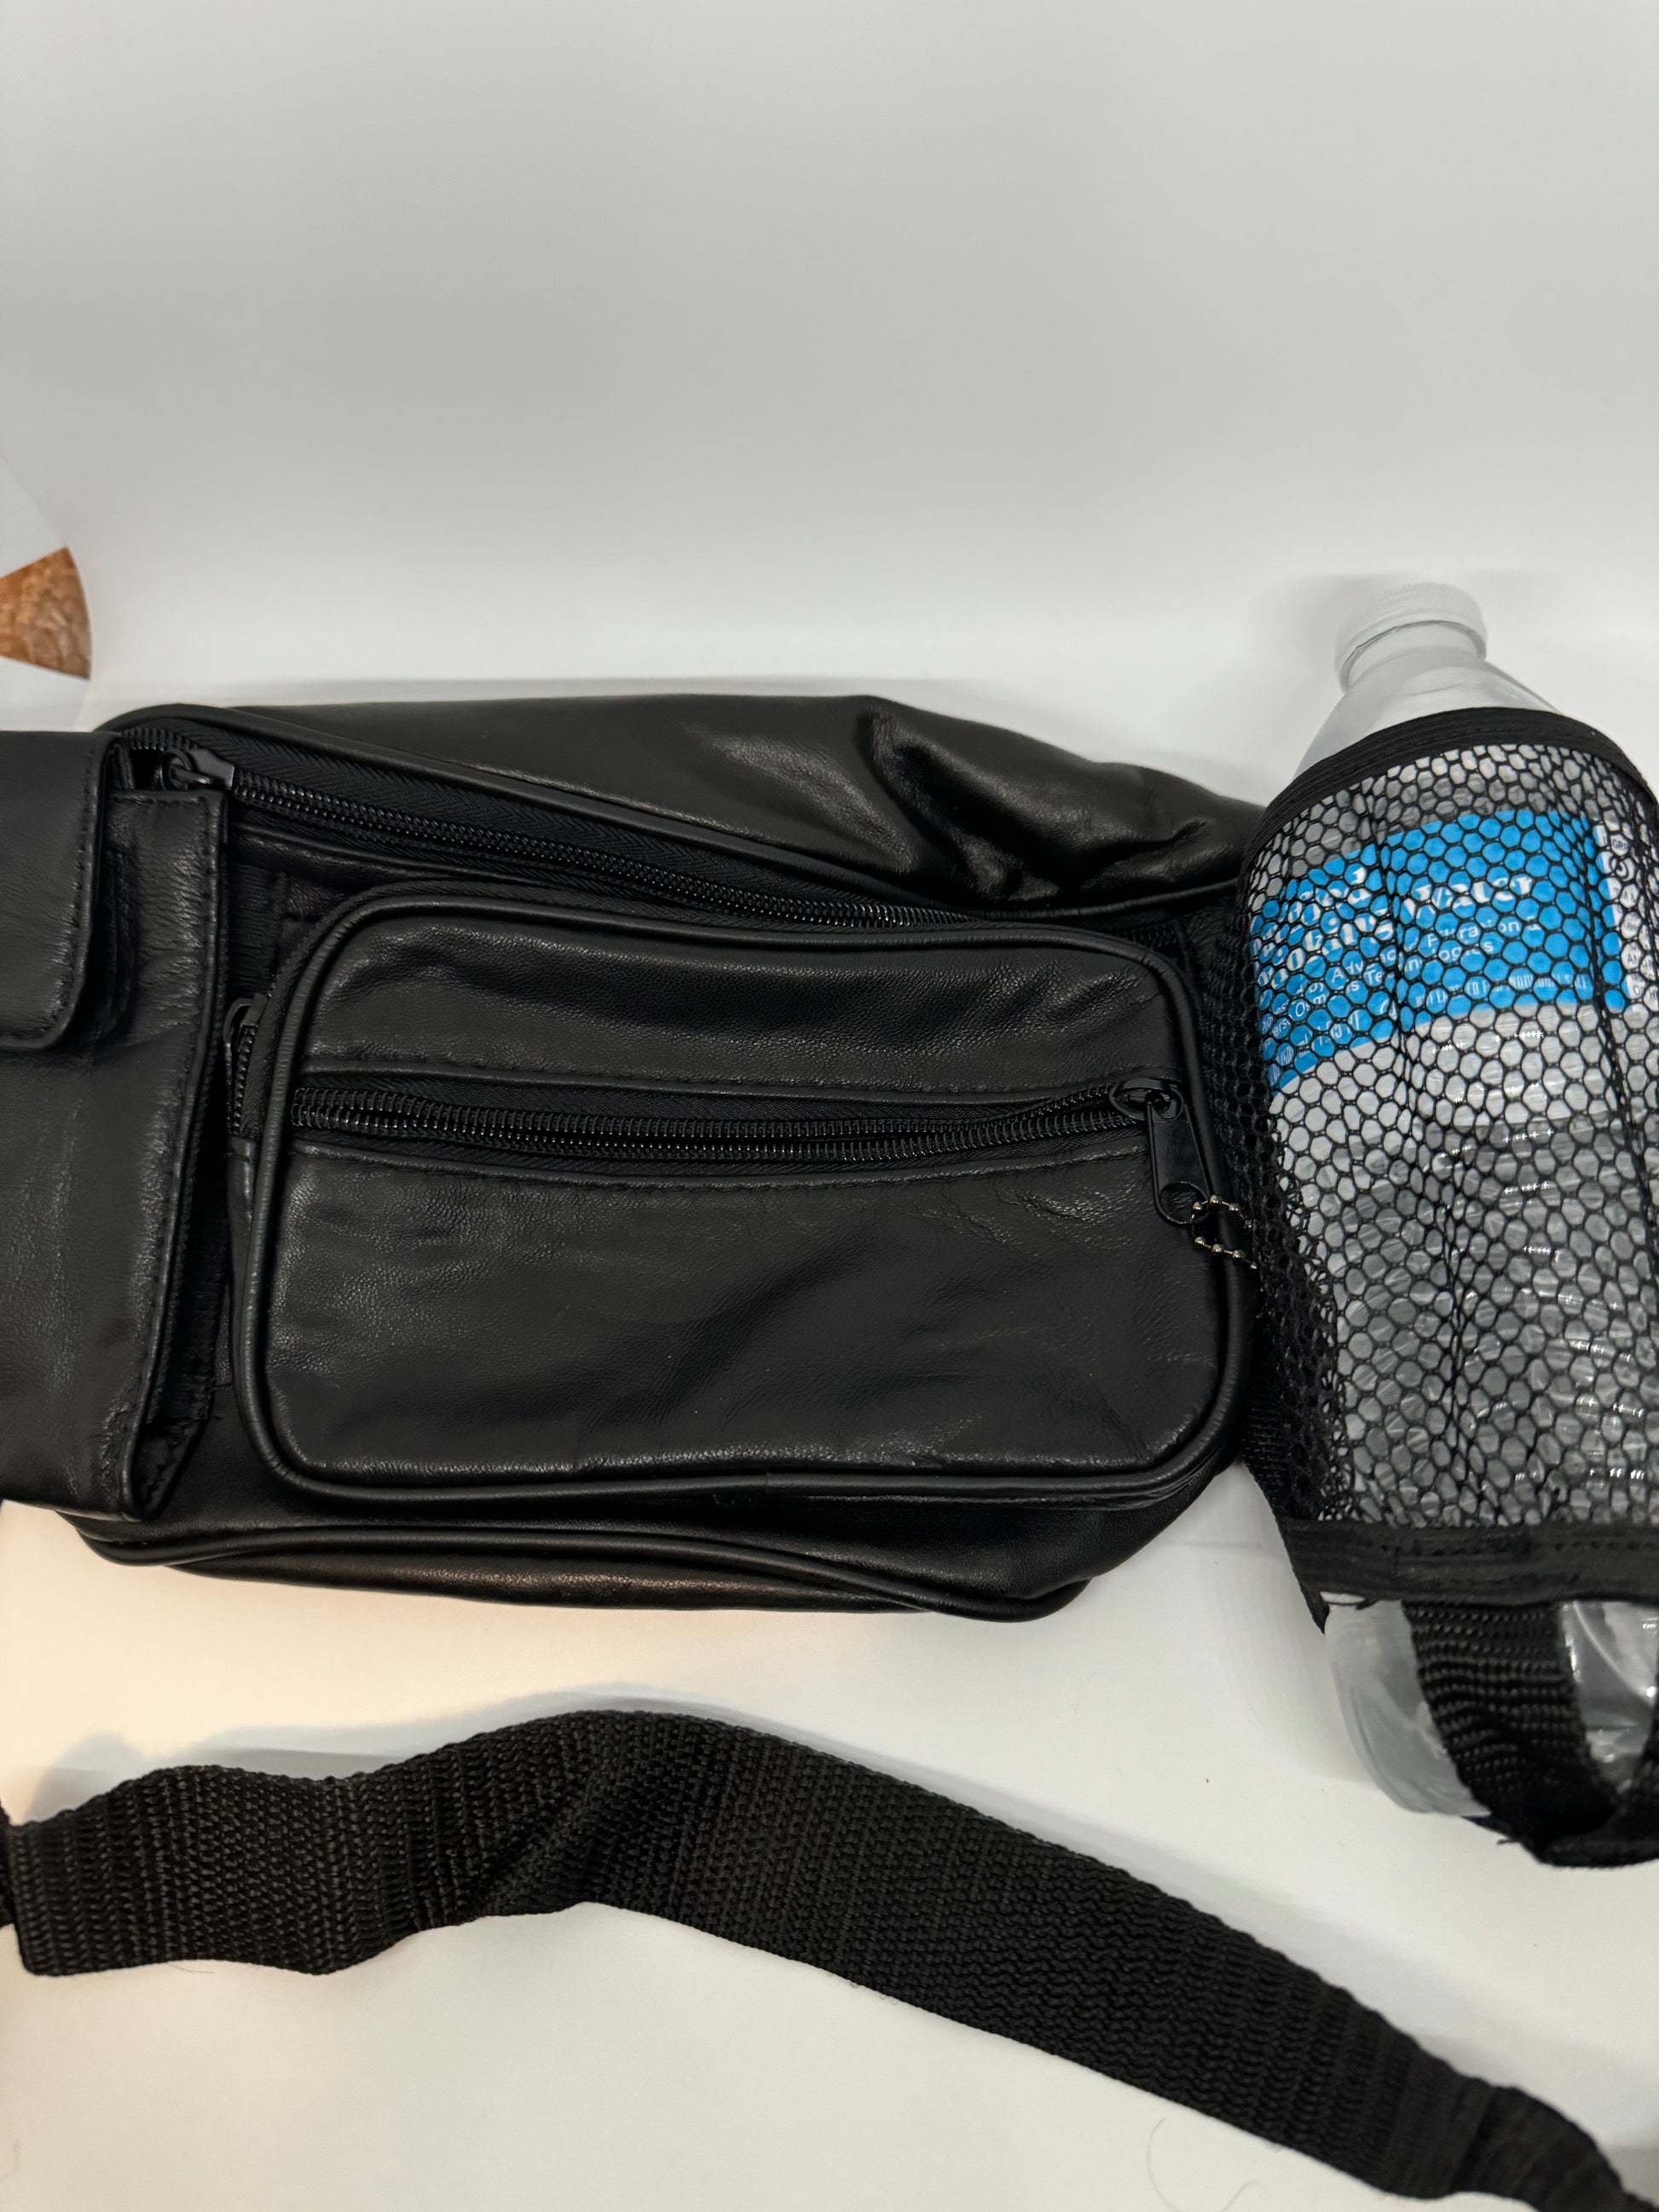 The picture shows a black waist bag (fanny pack) with a water bottle next to it. The waist bag is made of black leather and has multiple zippered compartments. The strap of the waist bag is also visible and it is made of a black woven fabric. The water bottle is in a black mesh holder and has a blue honeycomb pattern on it. The background is plain white.